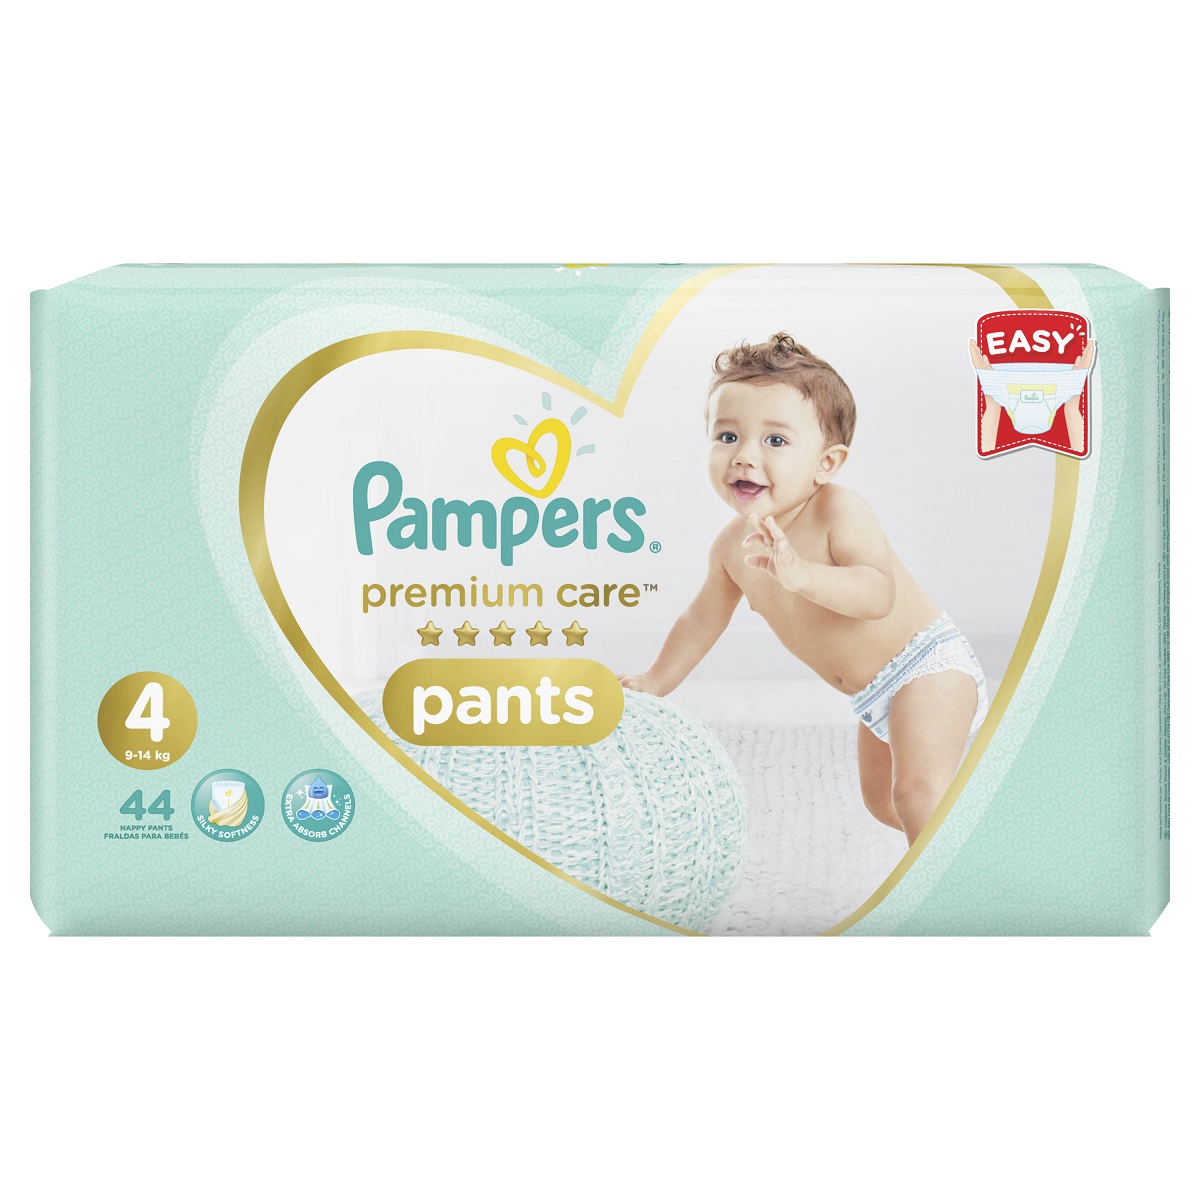 Pampers Premium Care Pants Diapers (size4 Large, 44pcs)